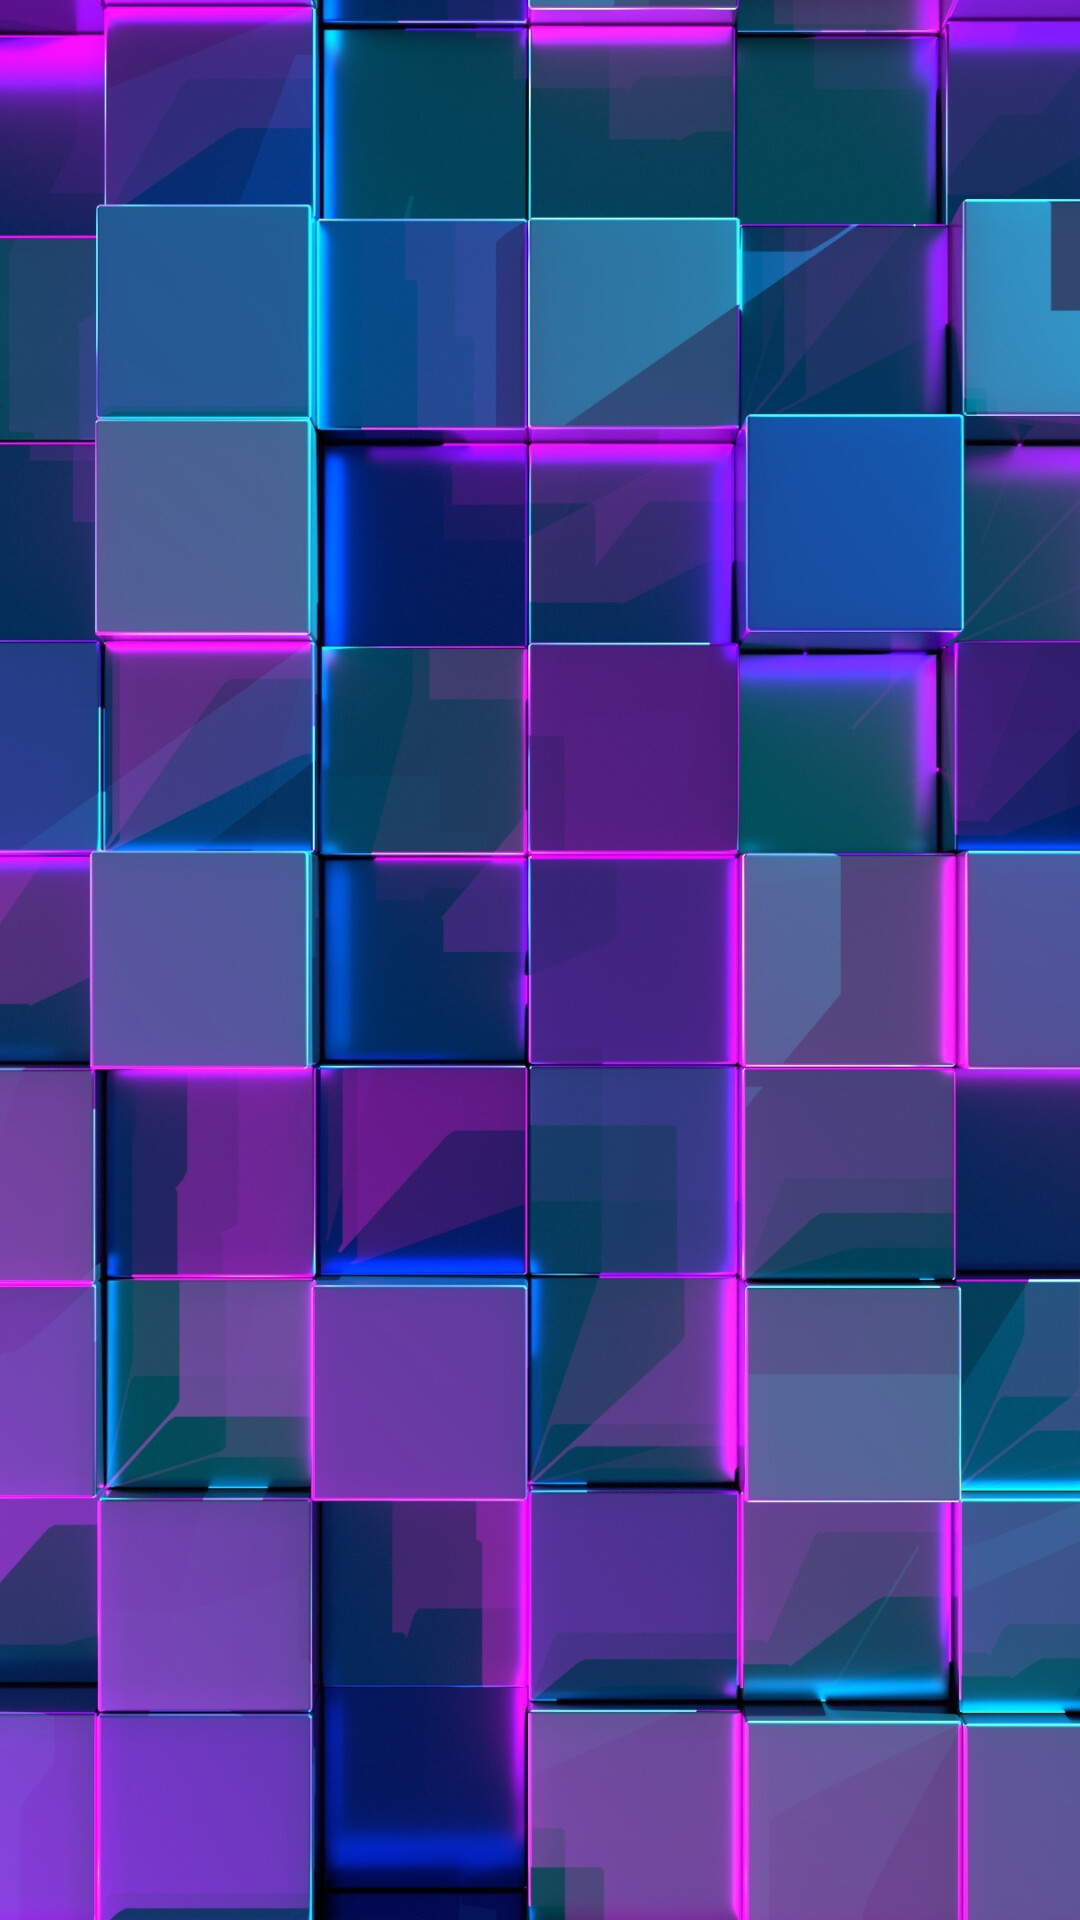 Geometry: Three-dimensional neon cubes, Right angles, Squares. 1080x1920 Full HD Wallpaper.